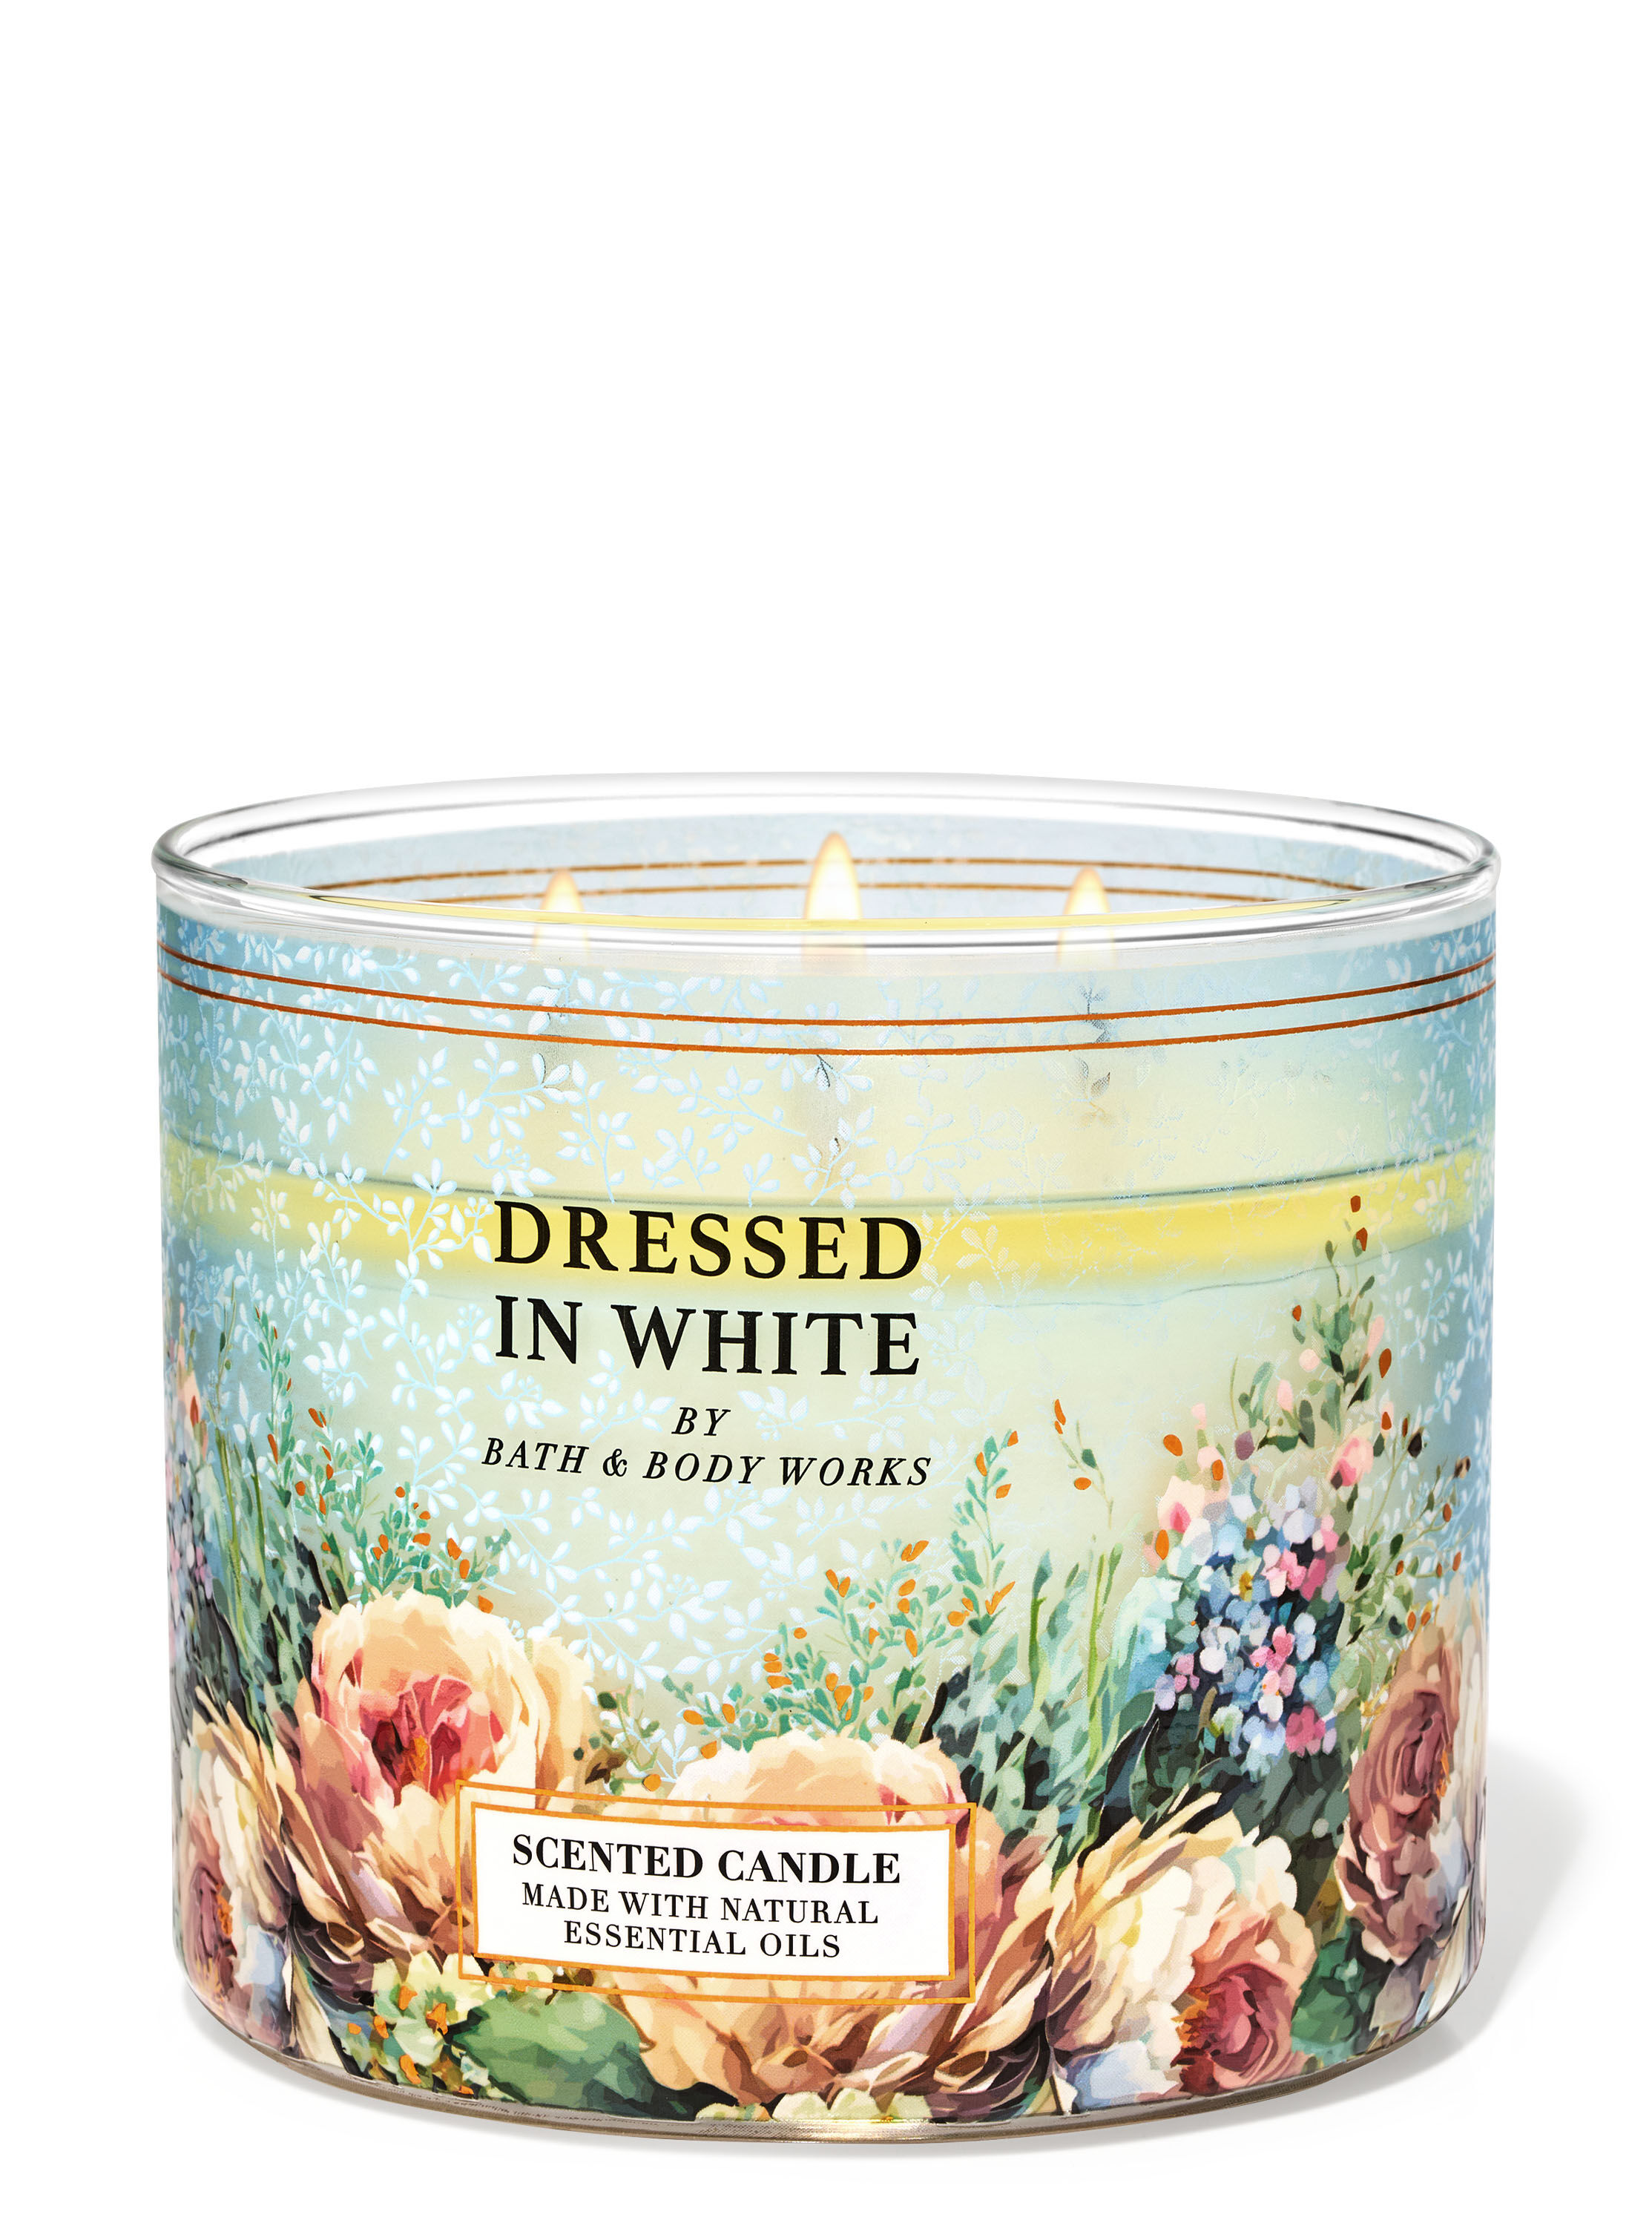 Dressed In White 3-Wick Candle